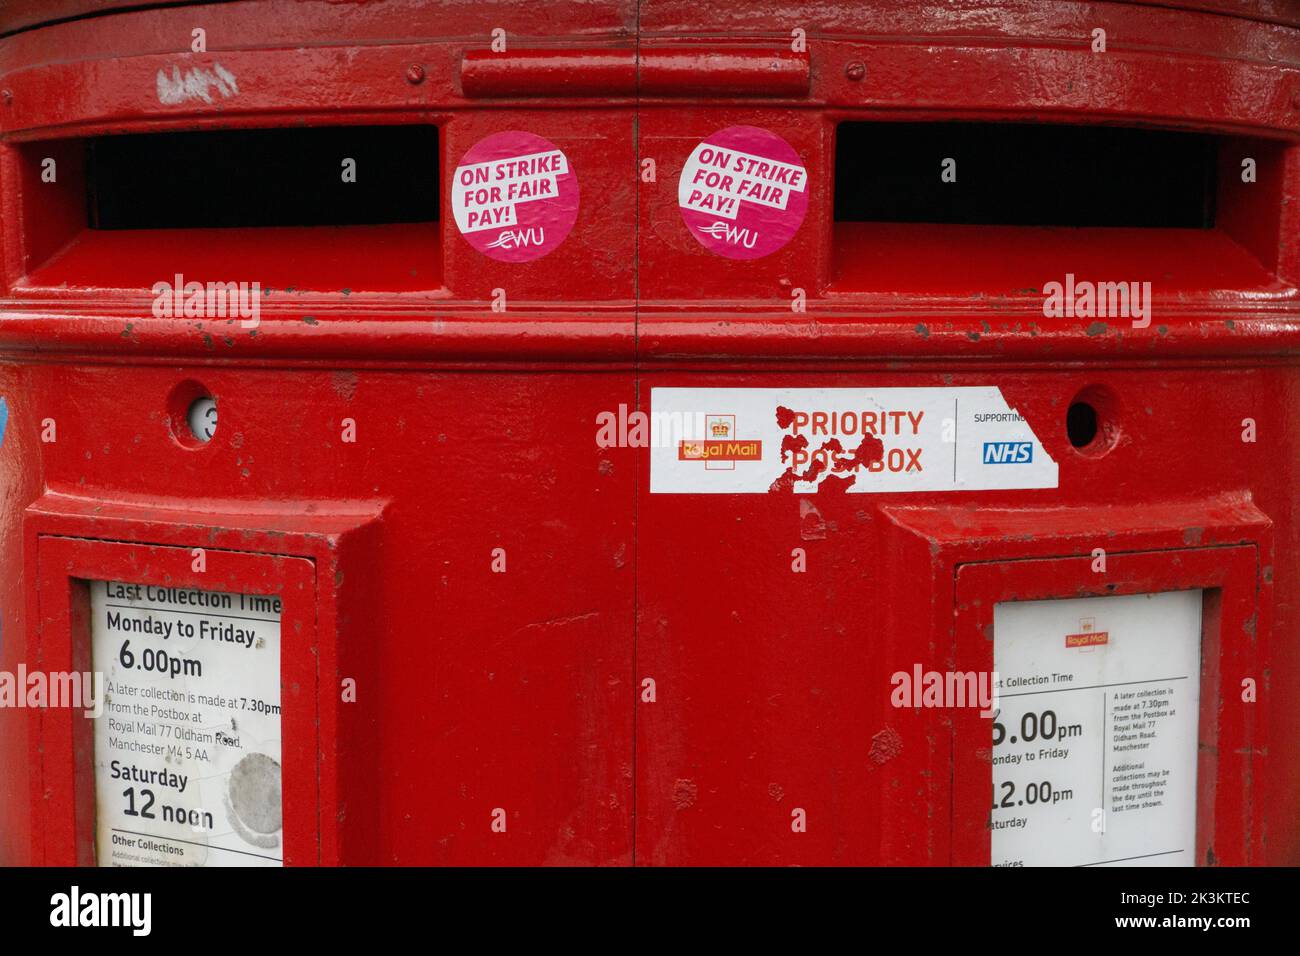 Manchester, UK, 25 Sept 2022: A post box in the Manchester suburb of Chorlton has been decorated with stickers from the CWU (Communication Workers Union) saying 'On strike for fair pay!' Postal workers are due to strike on 30th September and 1st October over fair pay and working conditions. Anna Watson/Alamy Live News Stock Photo